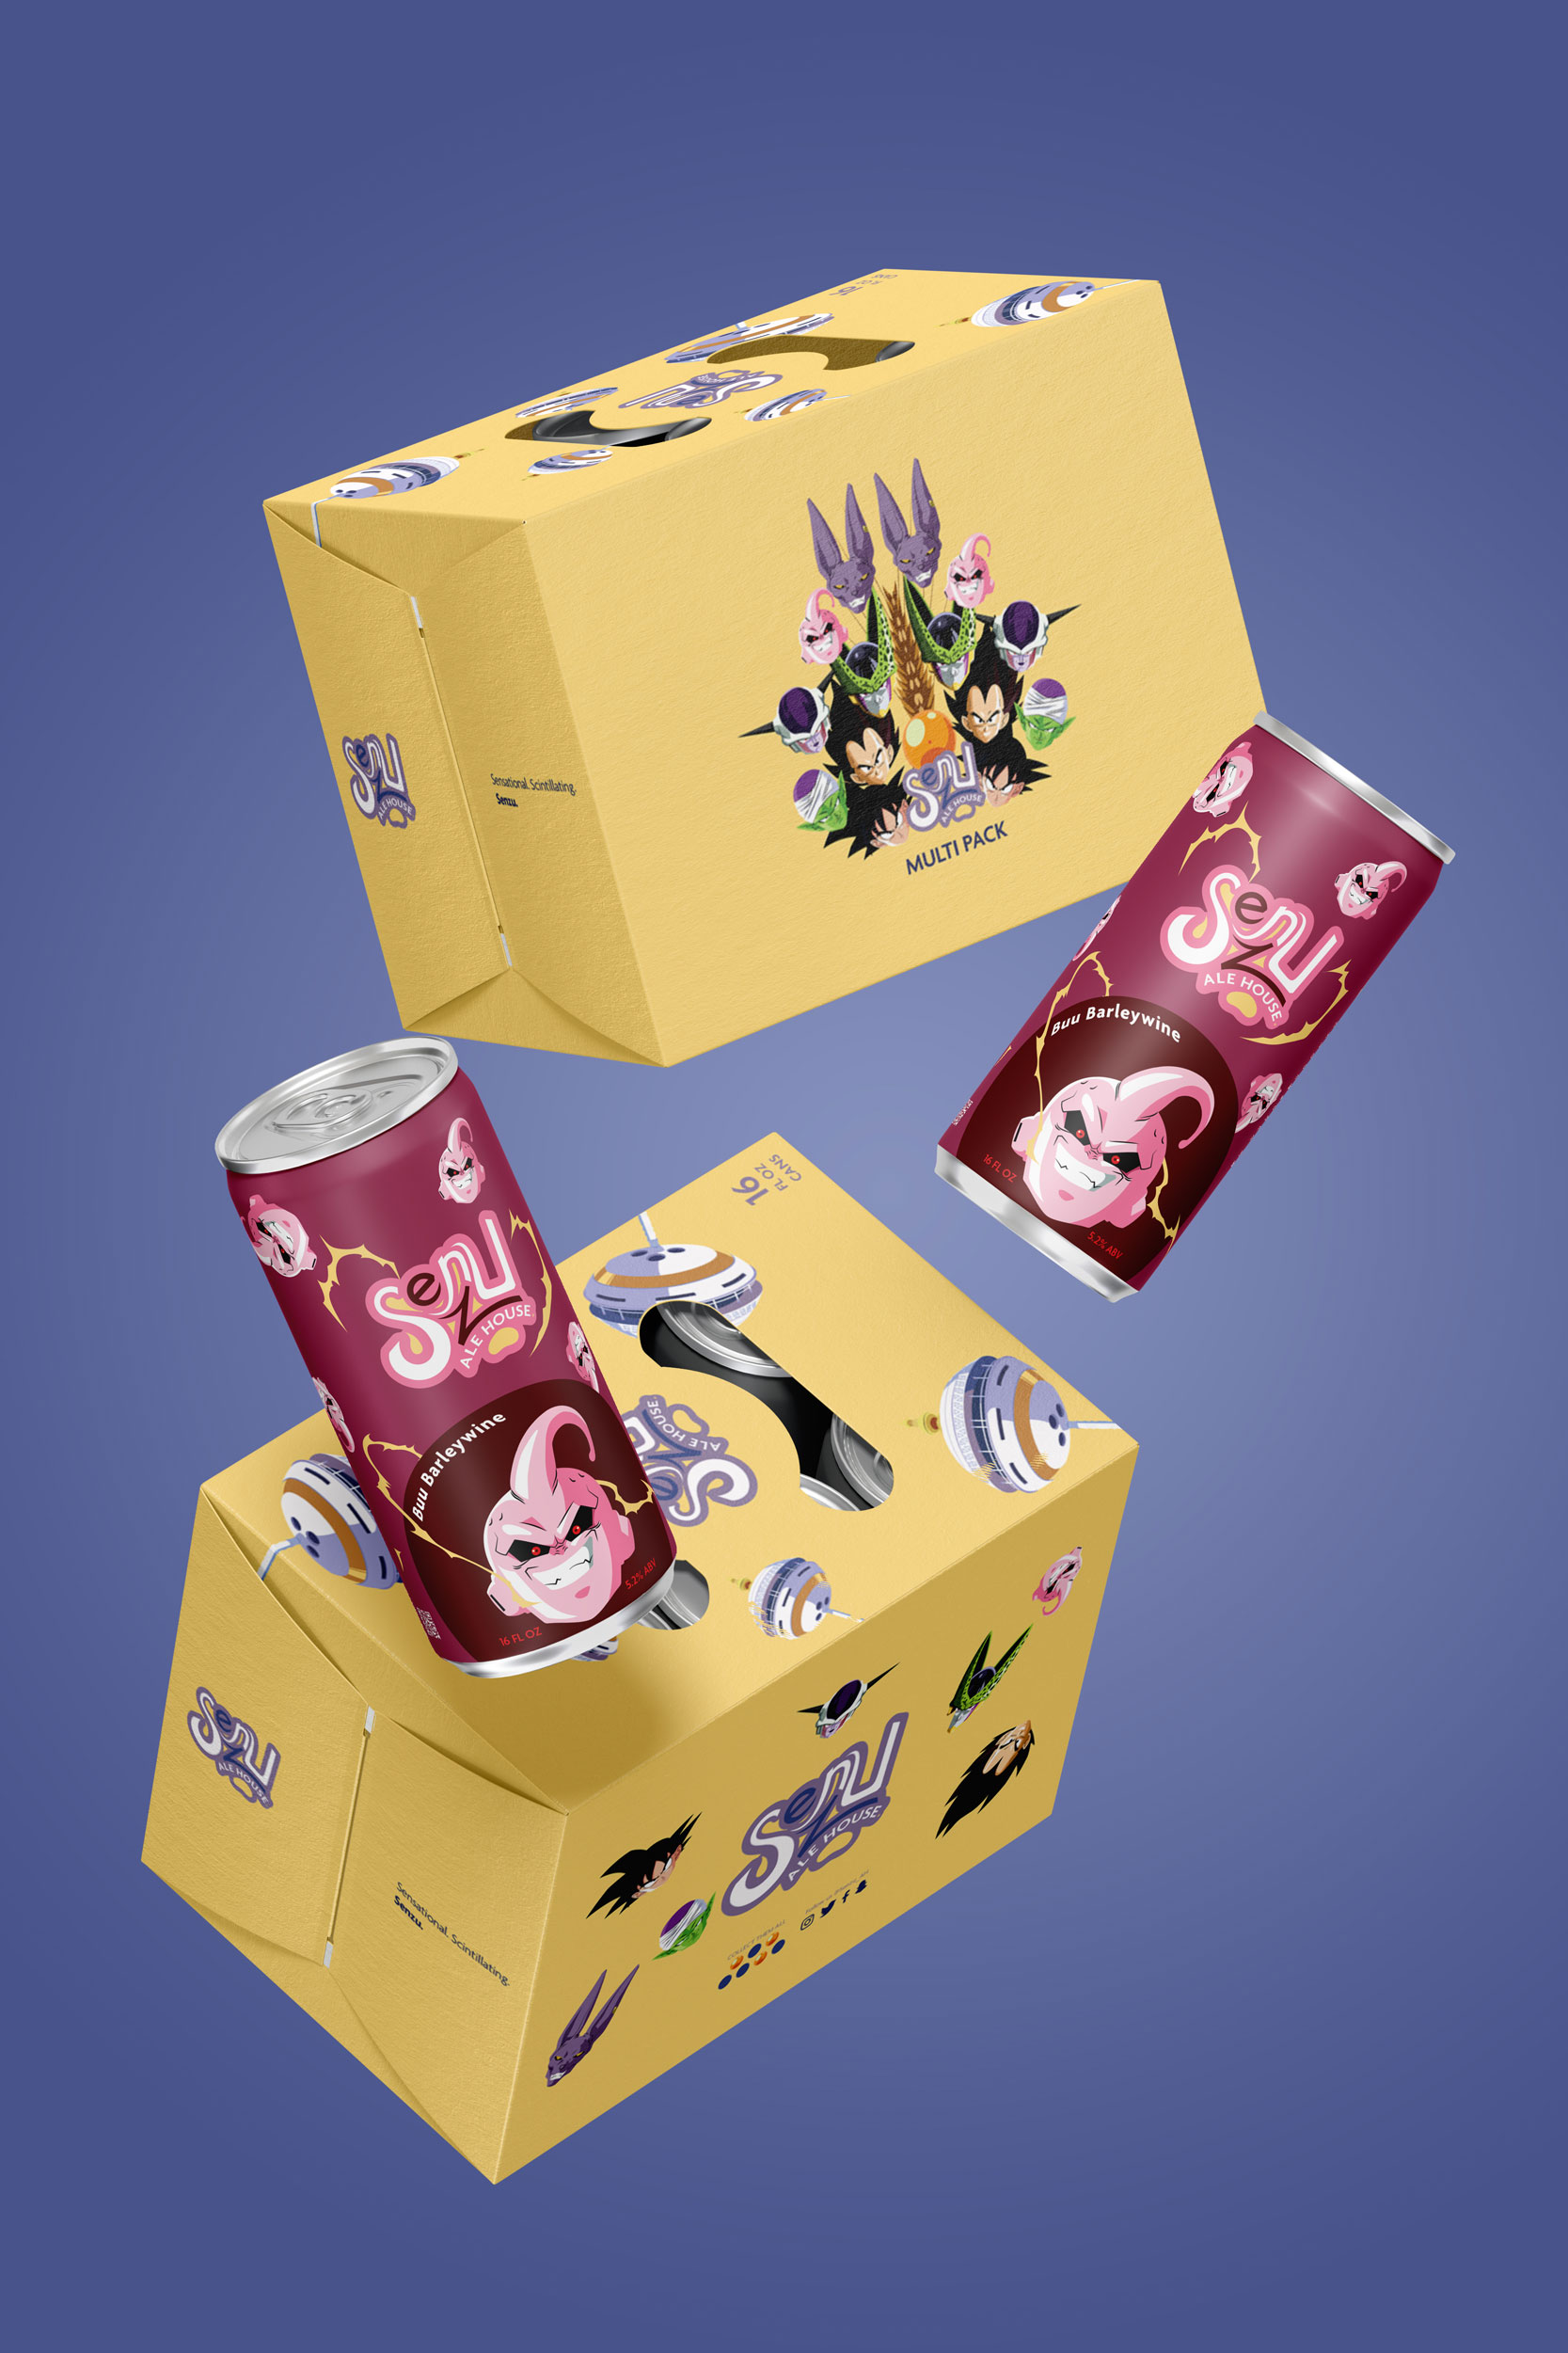 Senzu Ale House beer cans and box